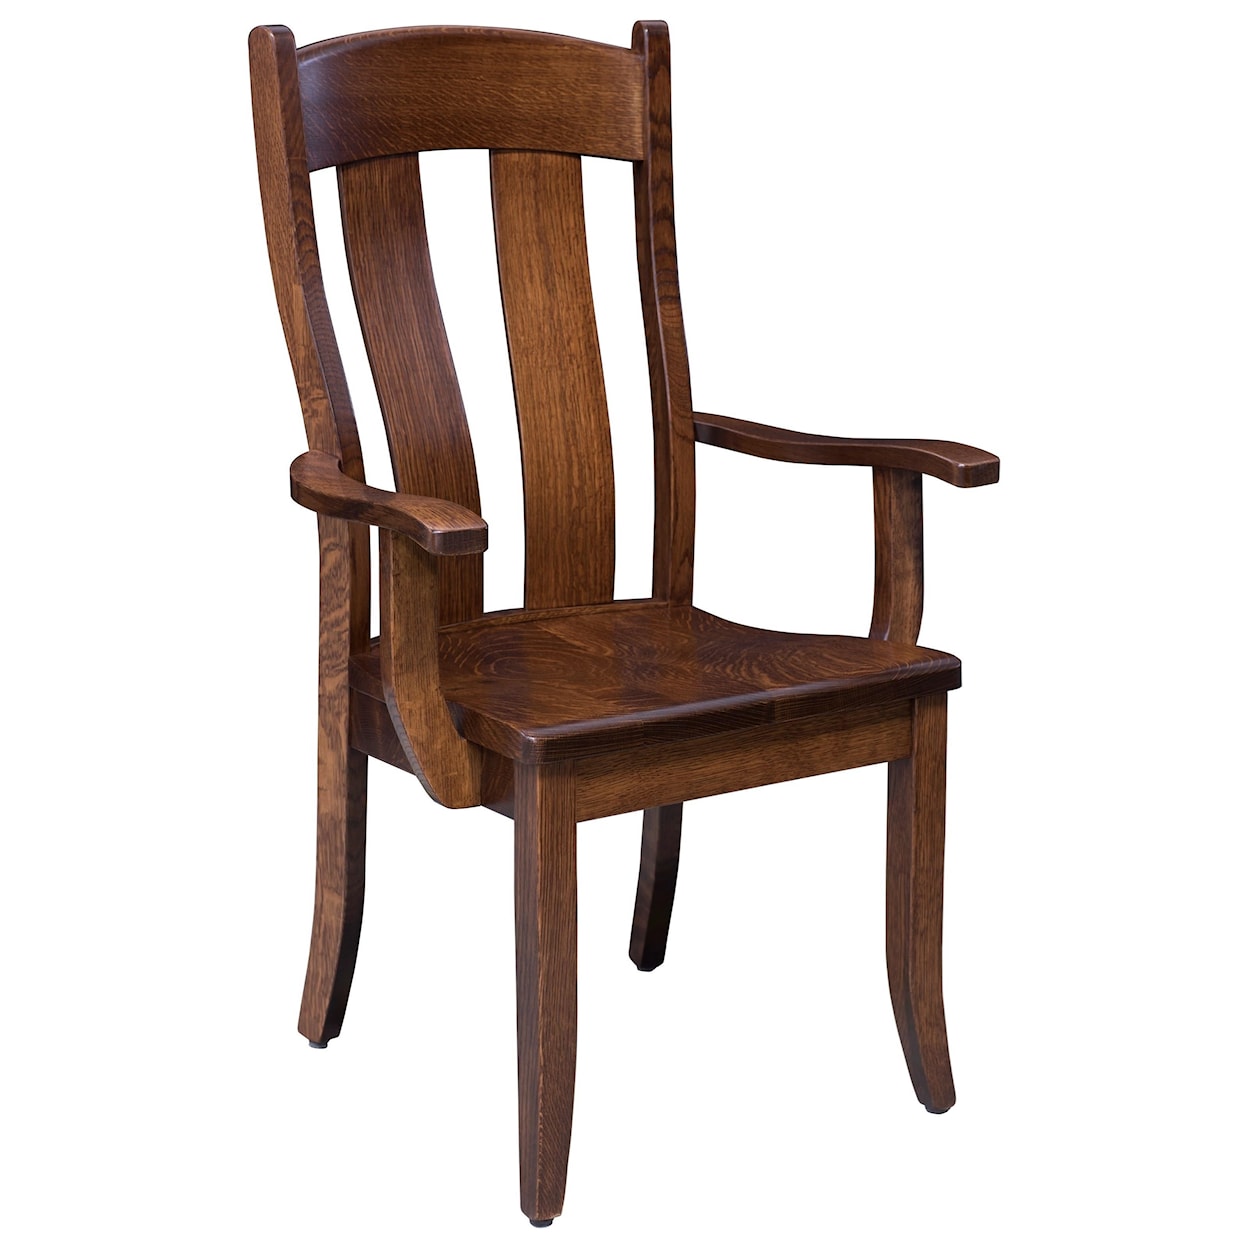 Trailway Amish Wood Fort Knox Customizable Arm Chair